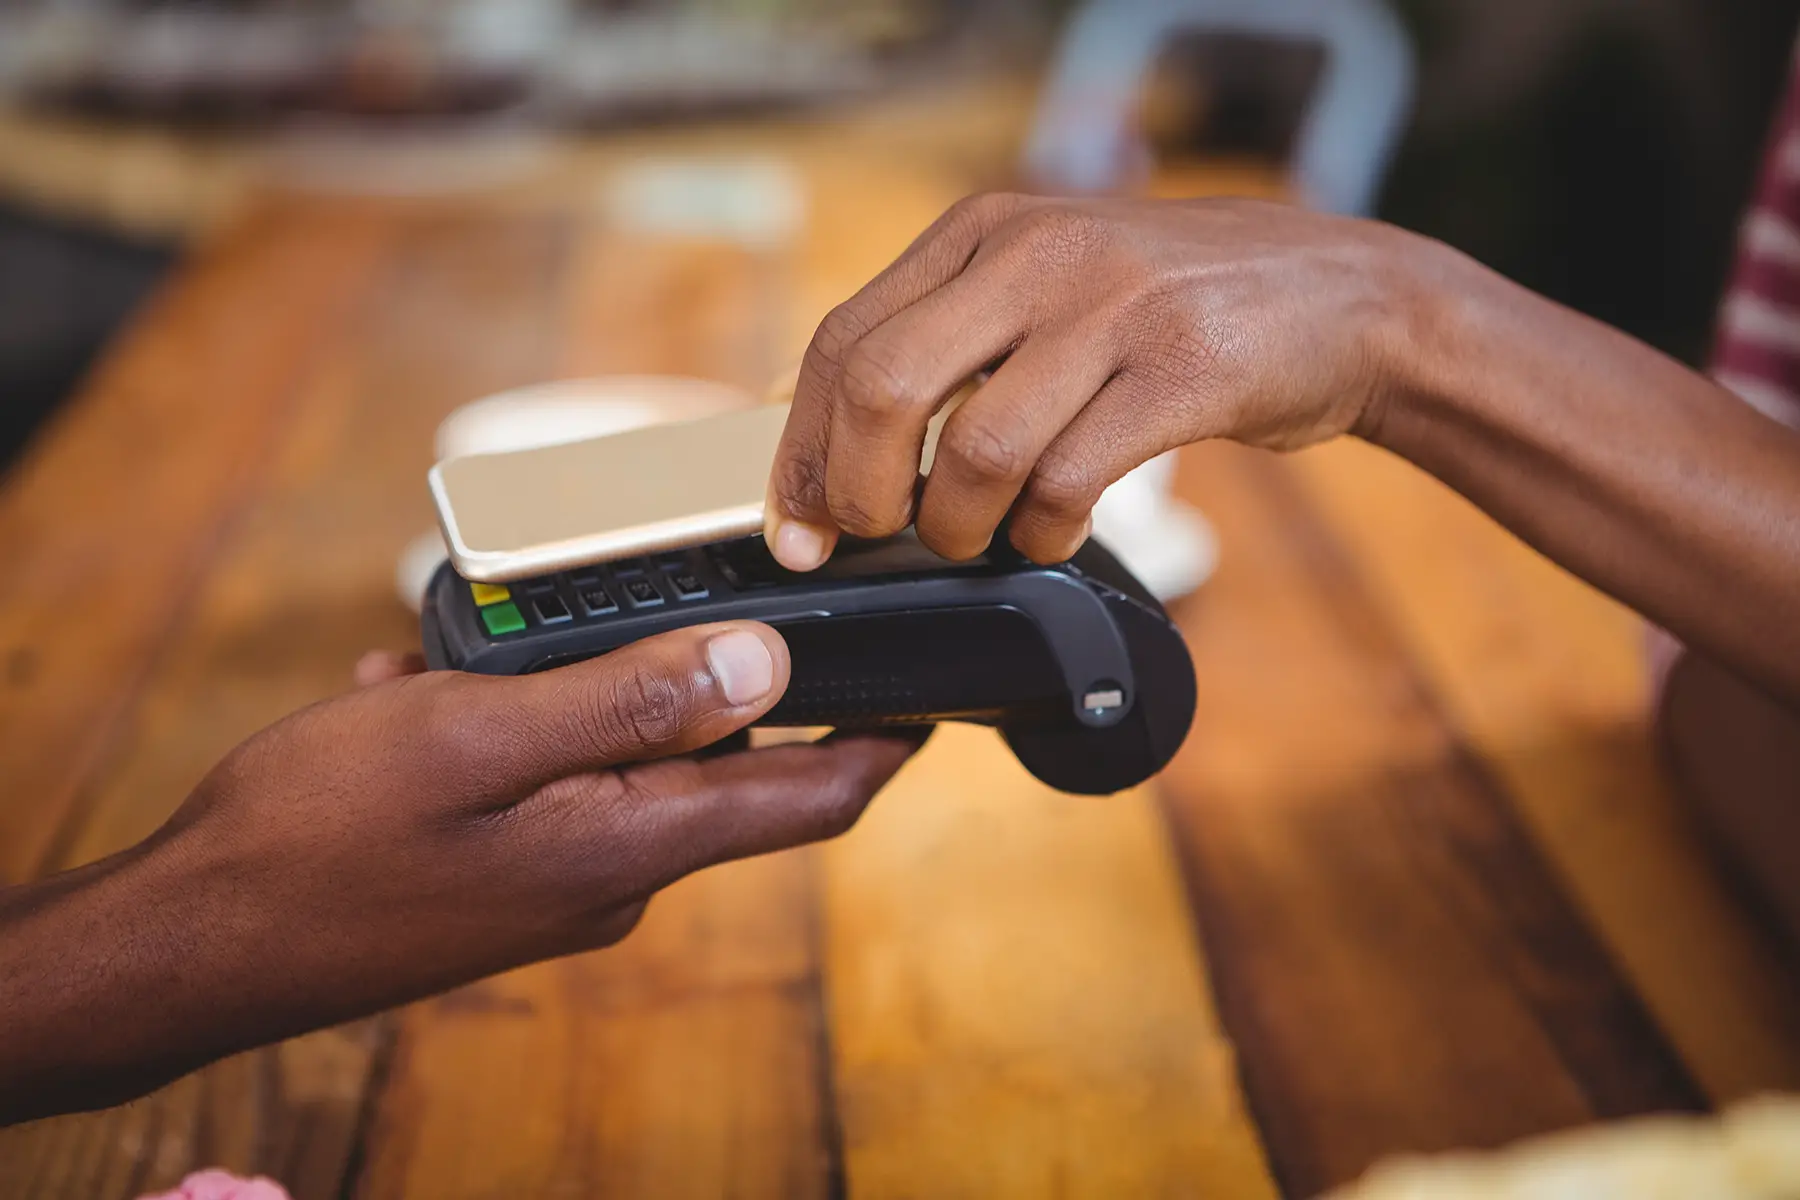 Paying the bill with a mobile phone